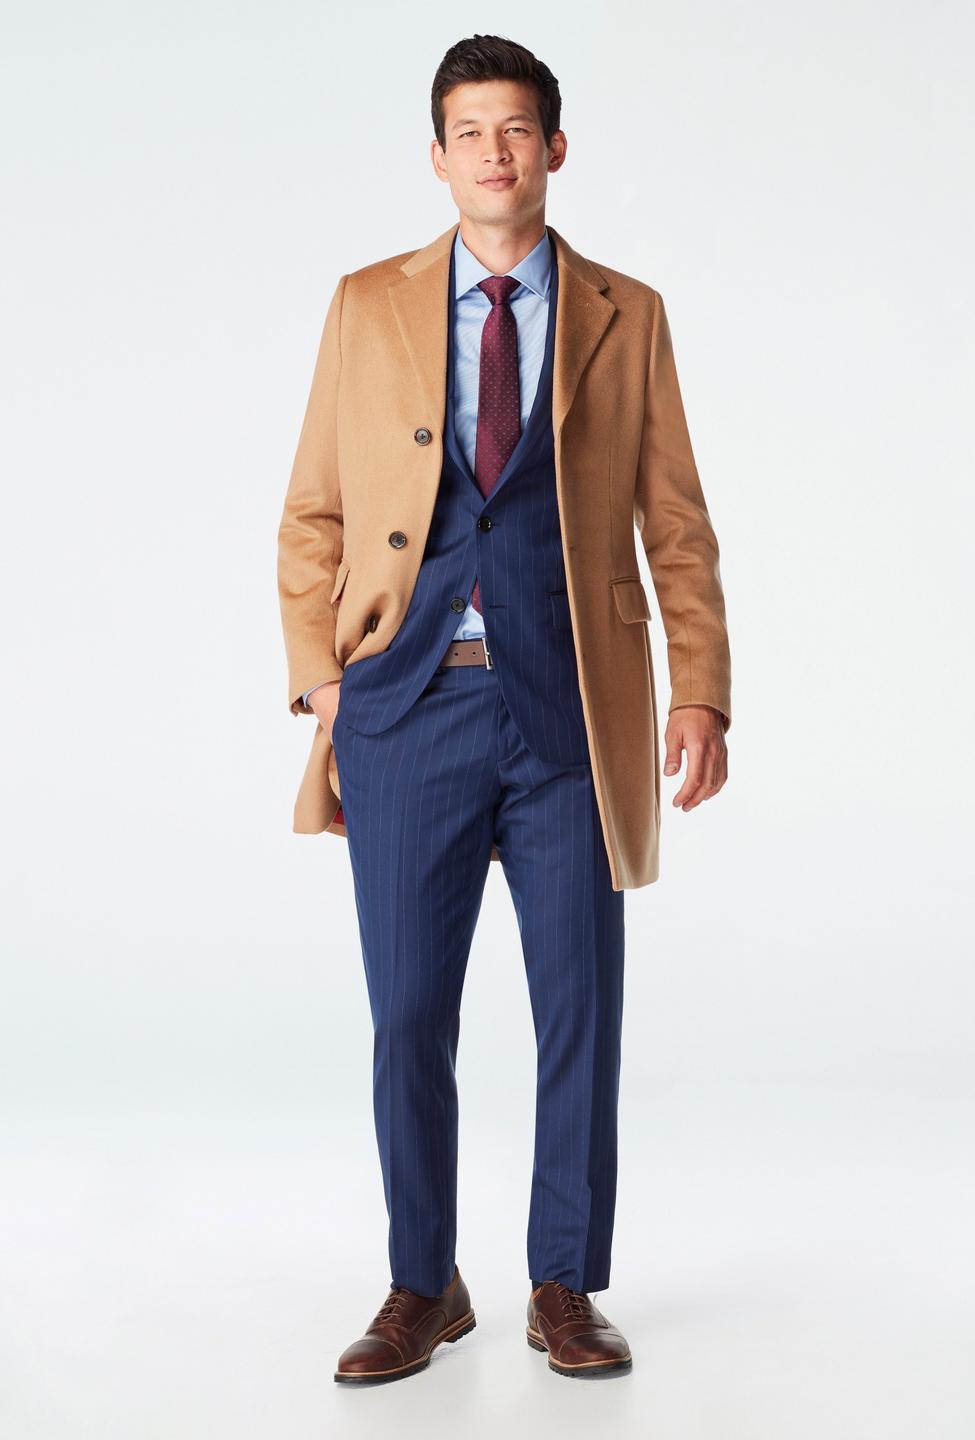 Brown outerwear - Heartford Solid Design from Indochino Collection